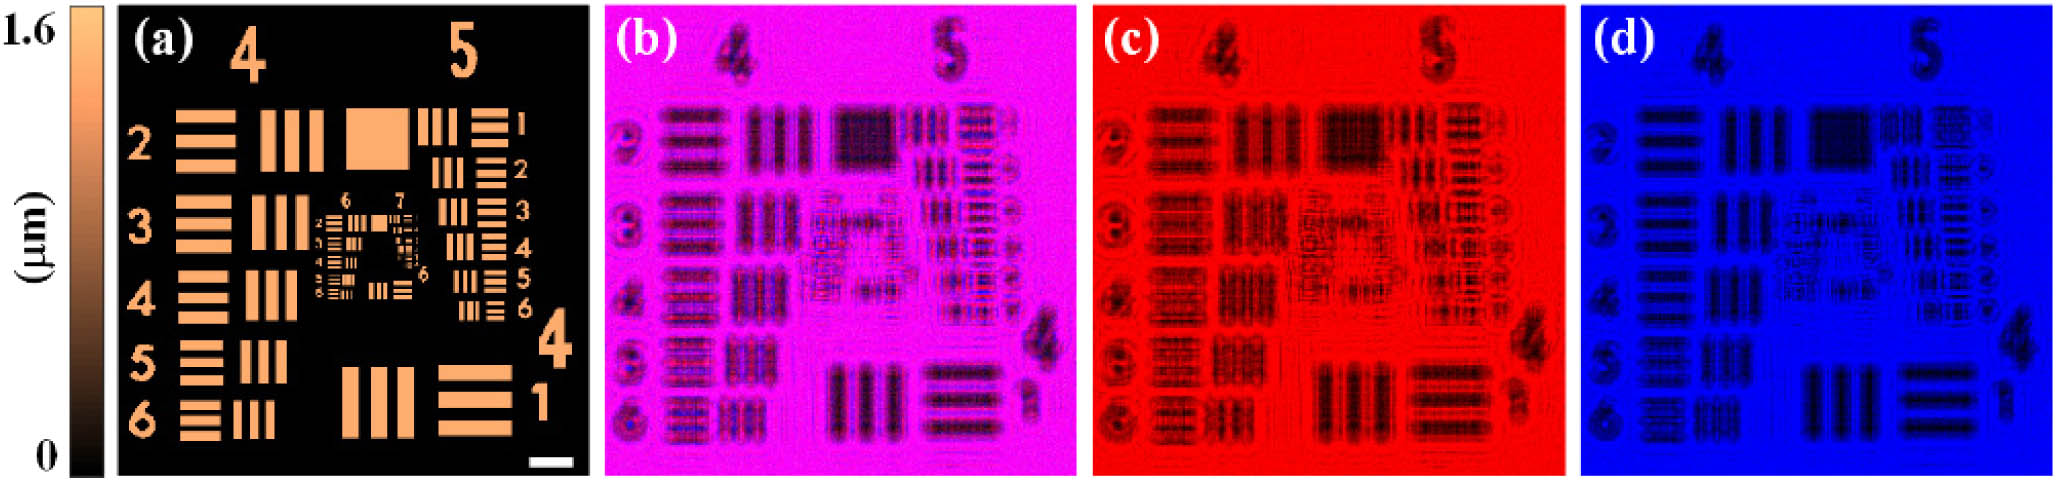 Simulation results of the numerical phase target for the single-shot DIDH. (a) The simulated optical thickness distribution of the object. (b) The simulated single-shot recorded dual-wavelength in-line hologram calculated at z=10 mm. (c) and (d) are the extracted single-wavelength holograms from (b). The white scale bar measures 200 μm.